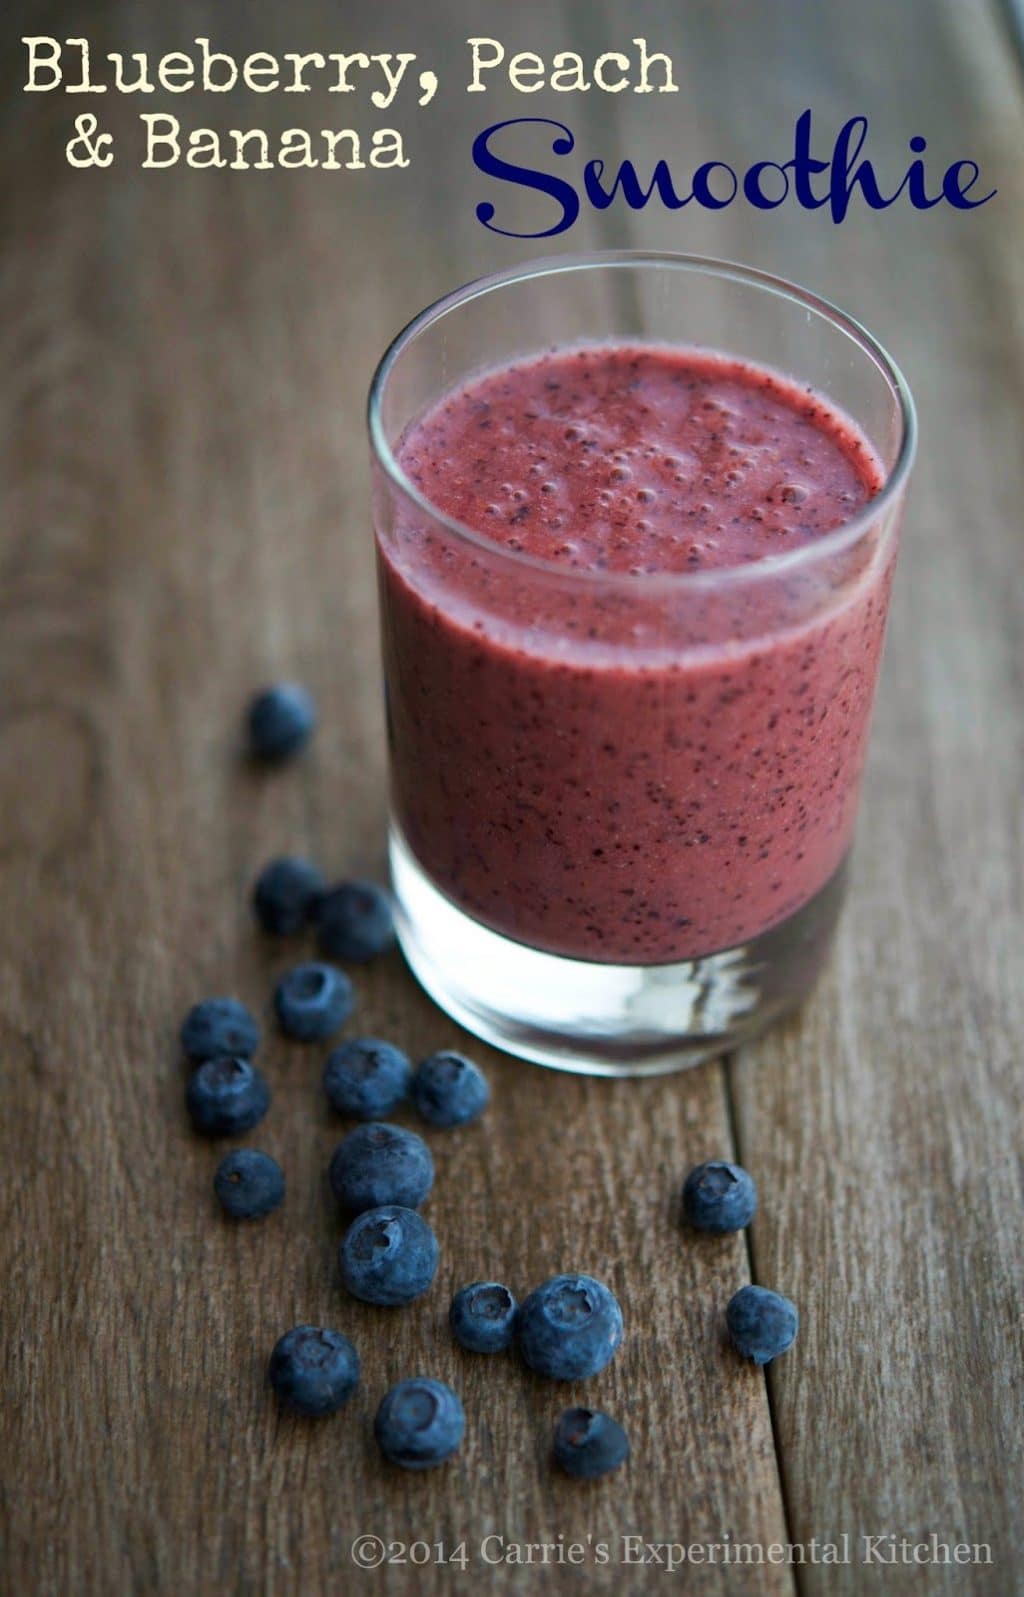 Blueberry, Peach and Banana Smoothie in a glass.